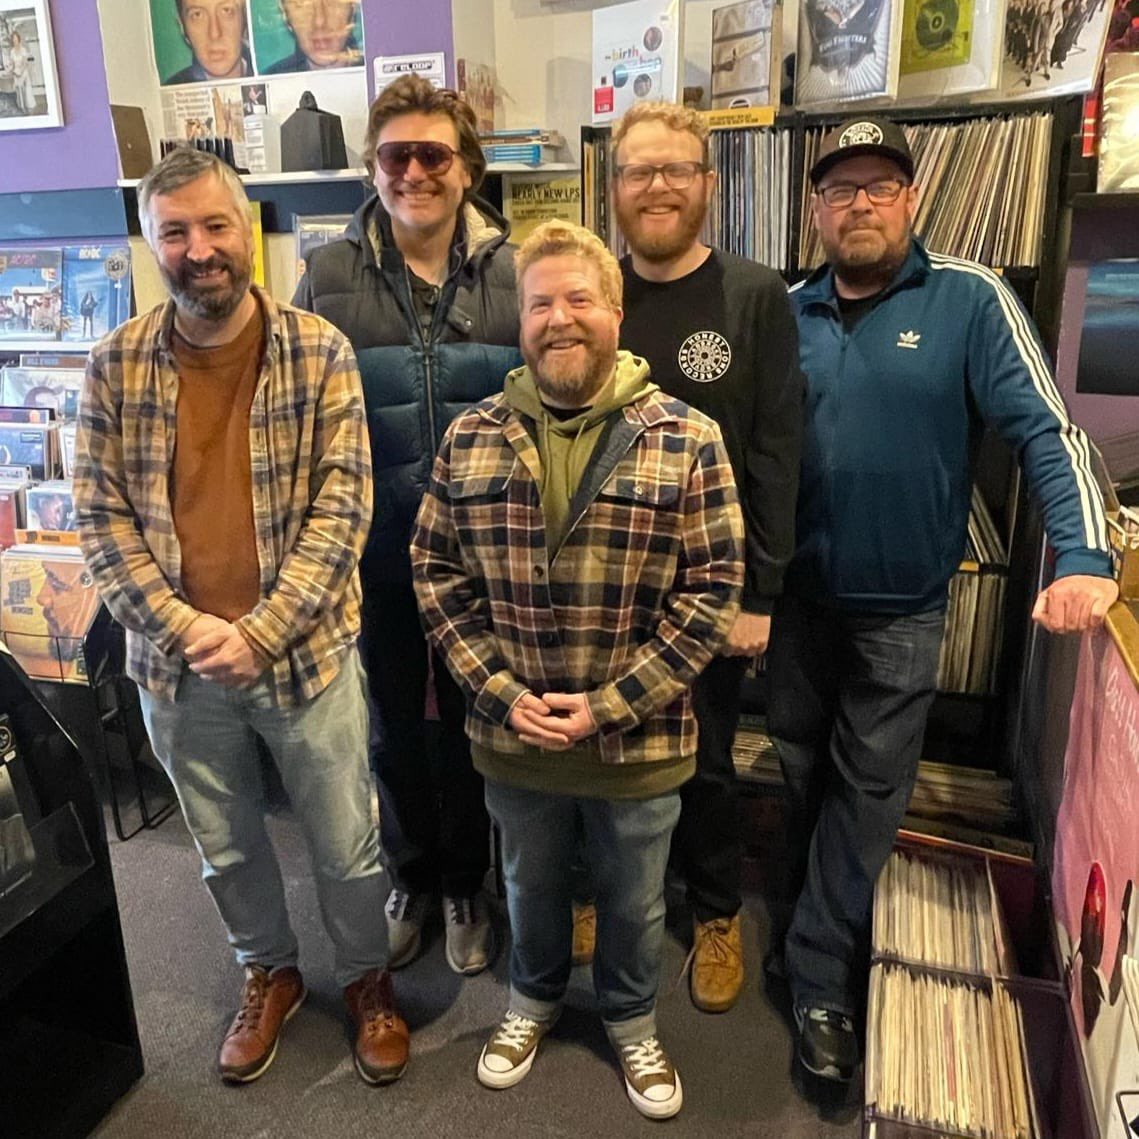 Listen to 6music from 6 with @huwstephens and Nicky @Manics for their visit to @diversevinyl who wouldn’t want to buy all their vinyl from these lovely three? Xx